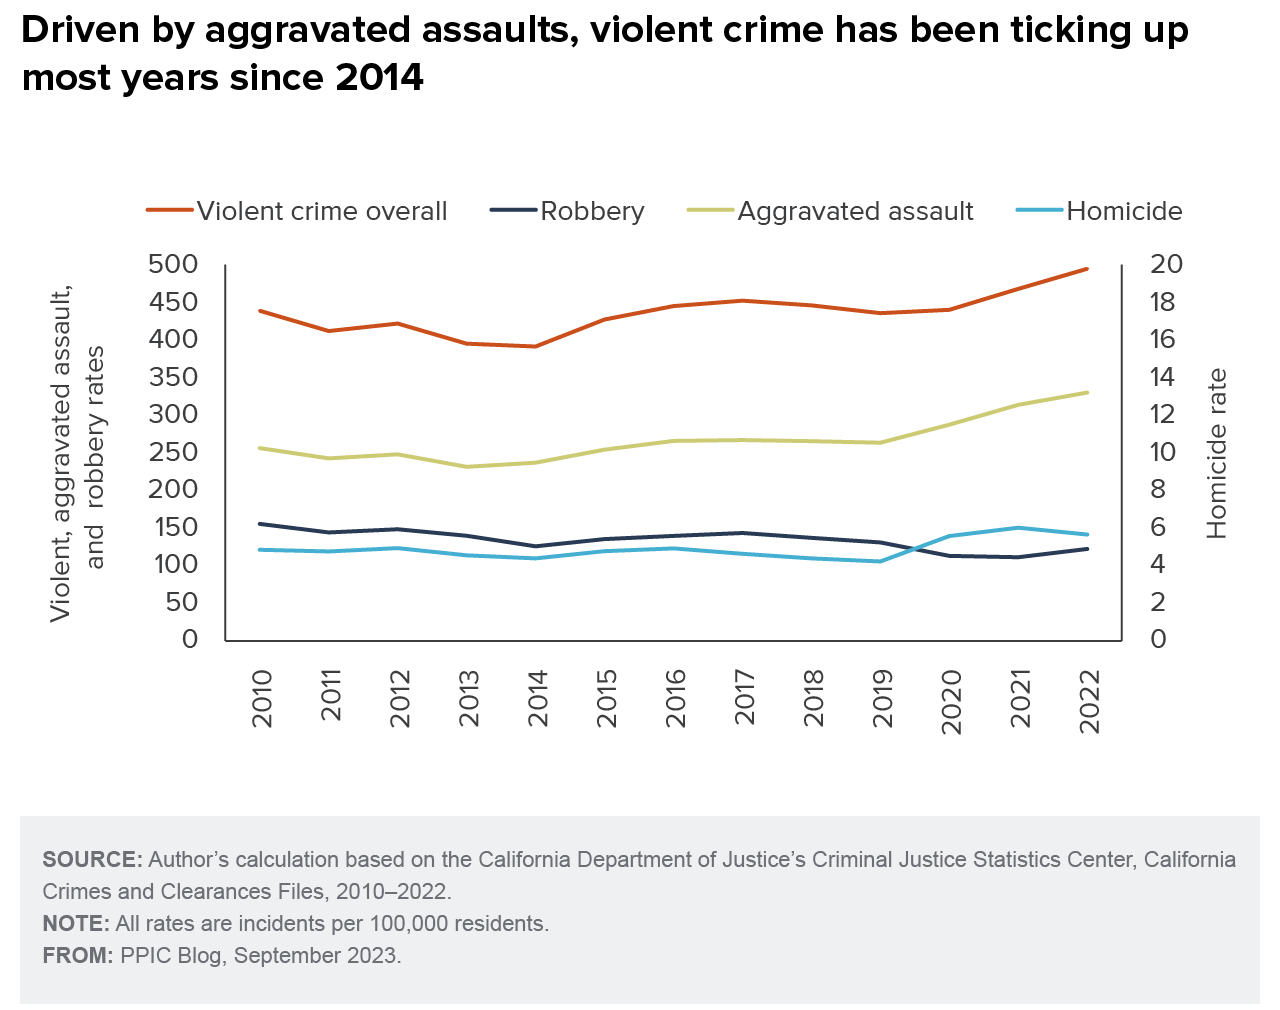 figure - Driven by aggravated assaults, violent crime has been ticking up most years since 2014